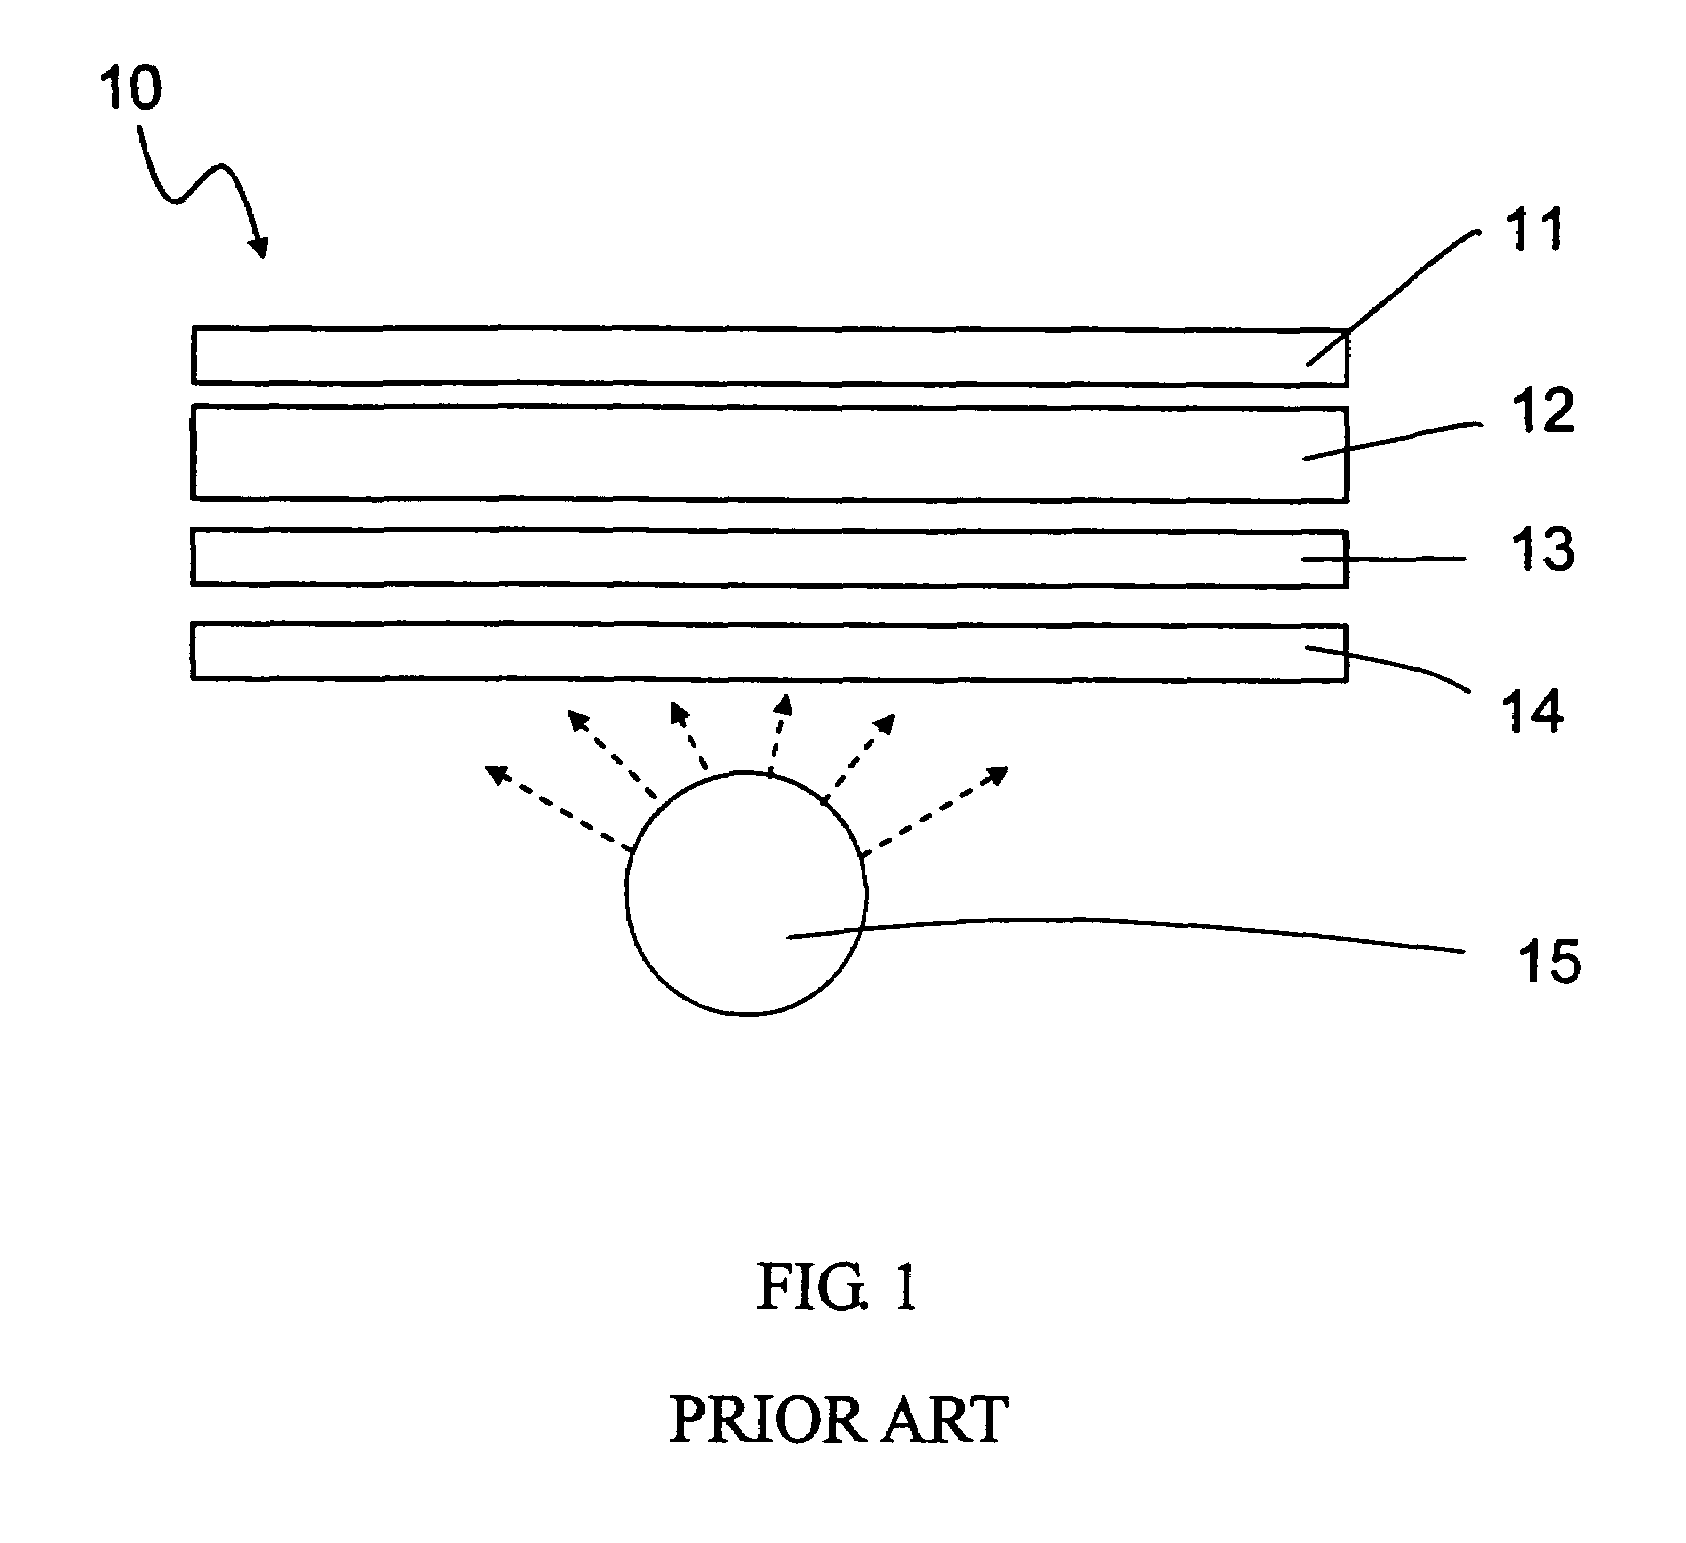 Transflective liquid crystal display with fringing and longitudinal electric field